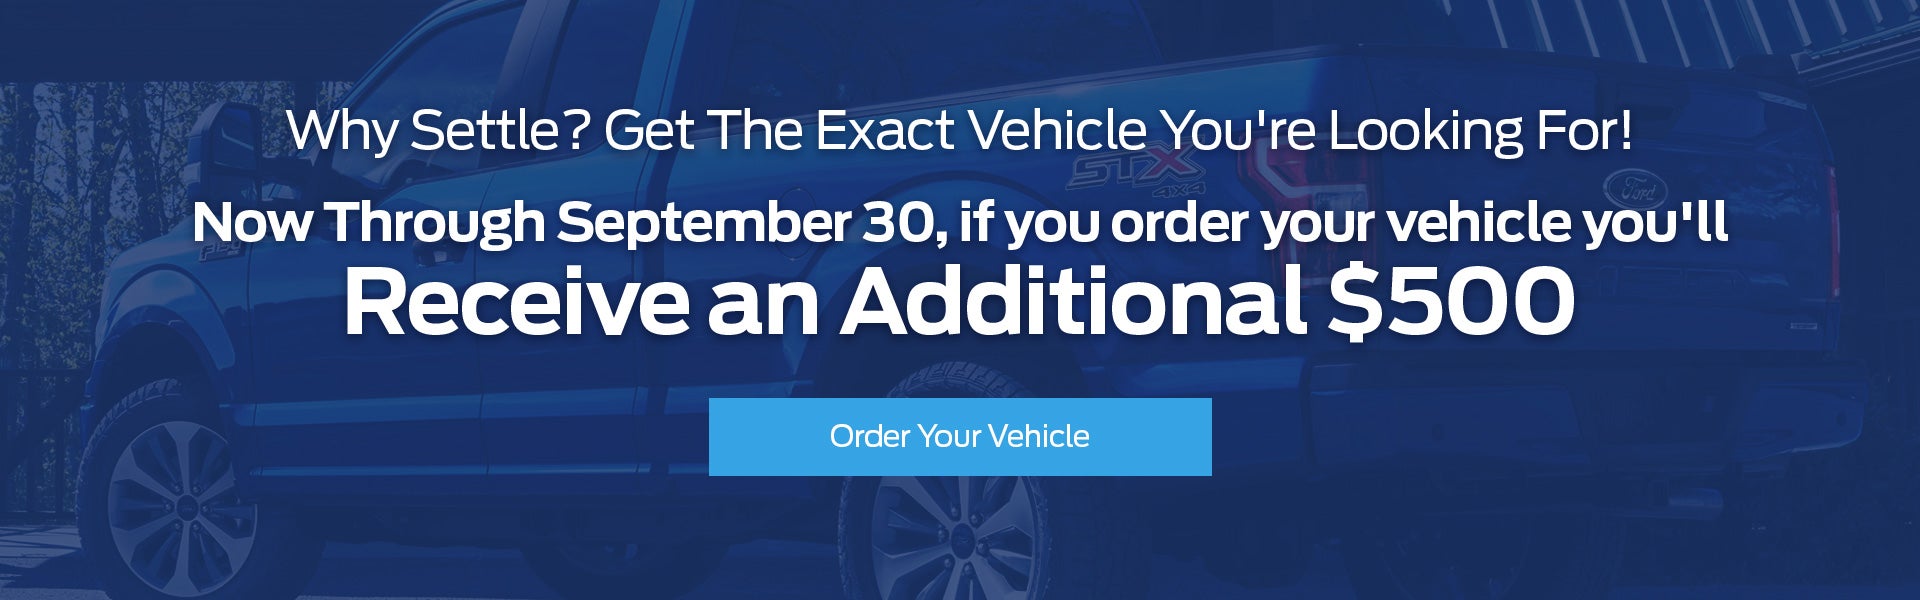 Order Your Vehicle & Receive An Additional $500